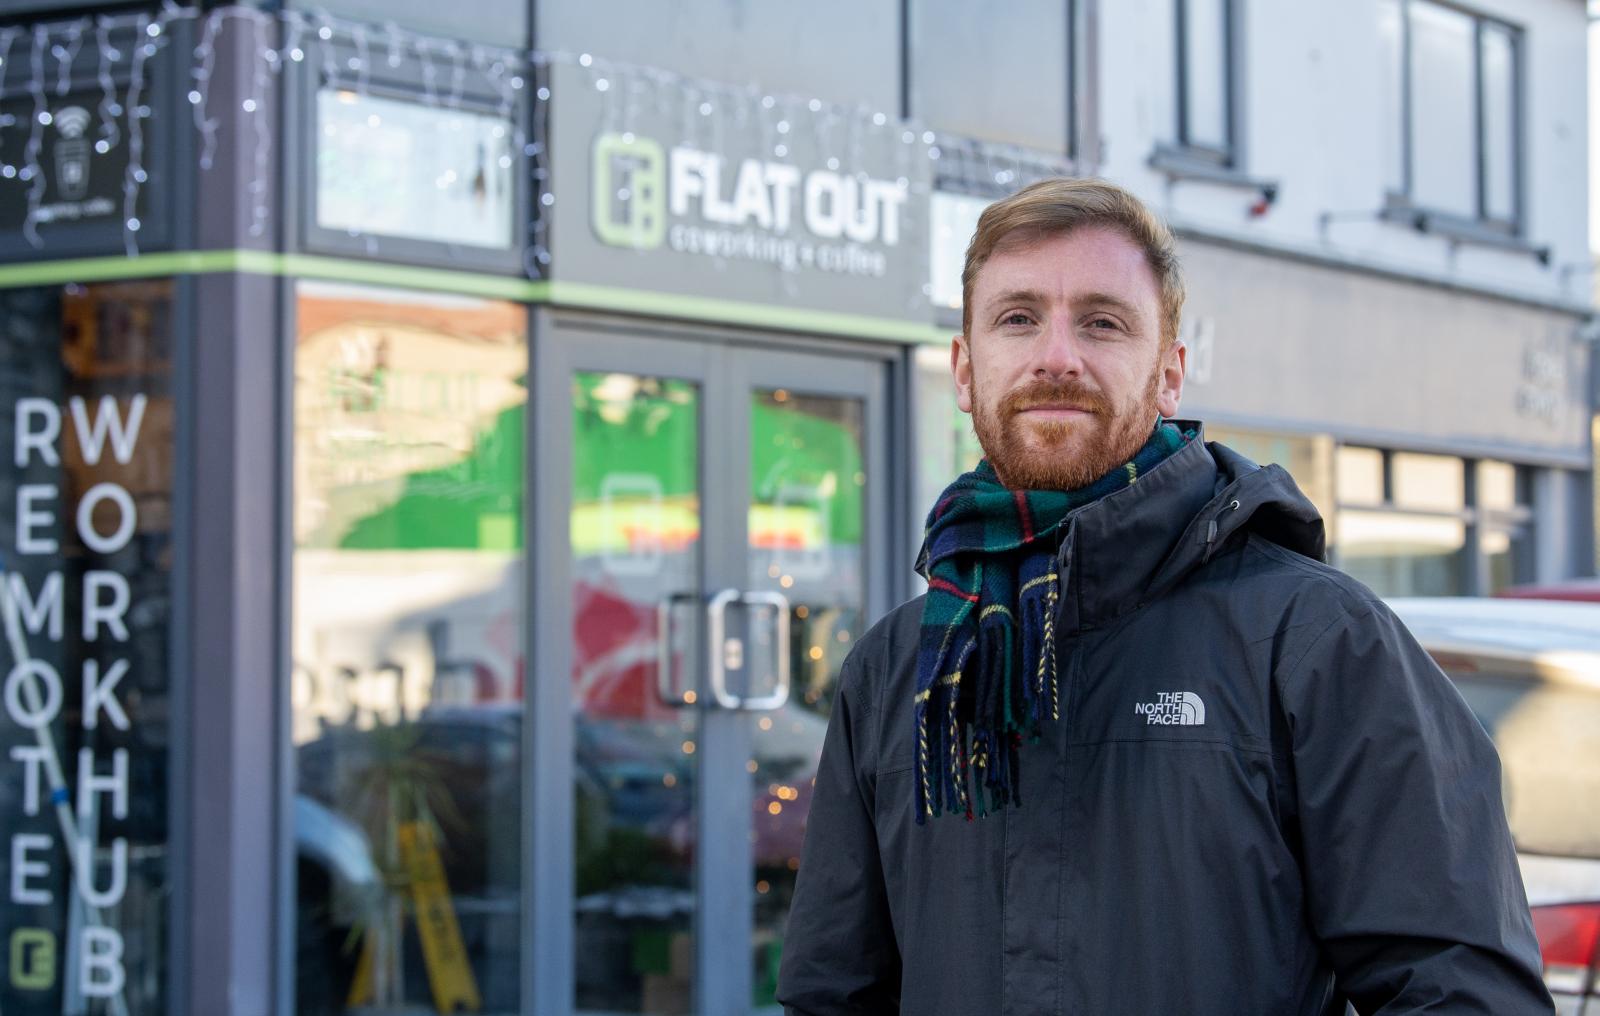 Liam Staff Pictured outside Flat Out Co-working and Coffee Trim 